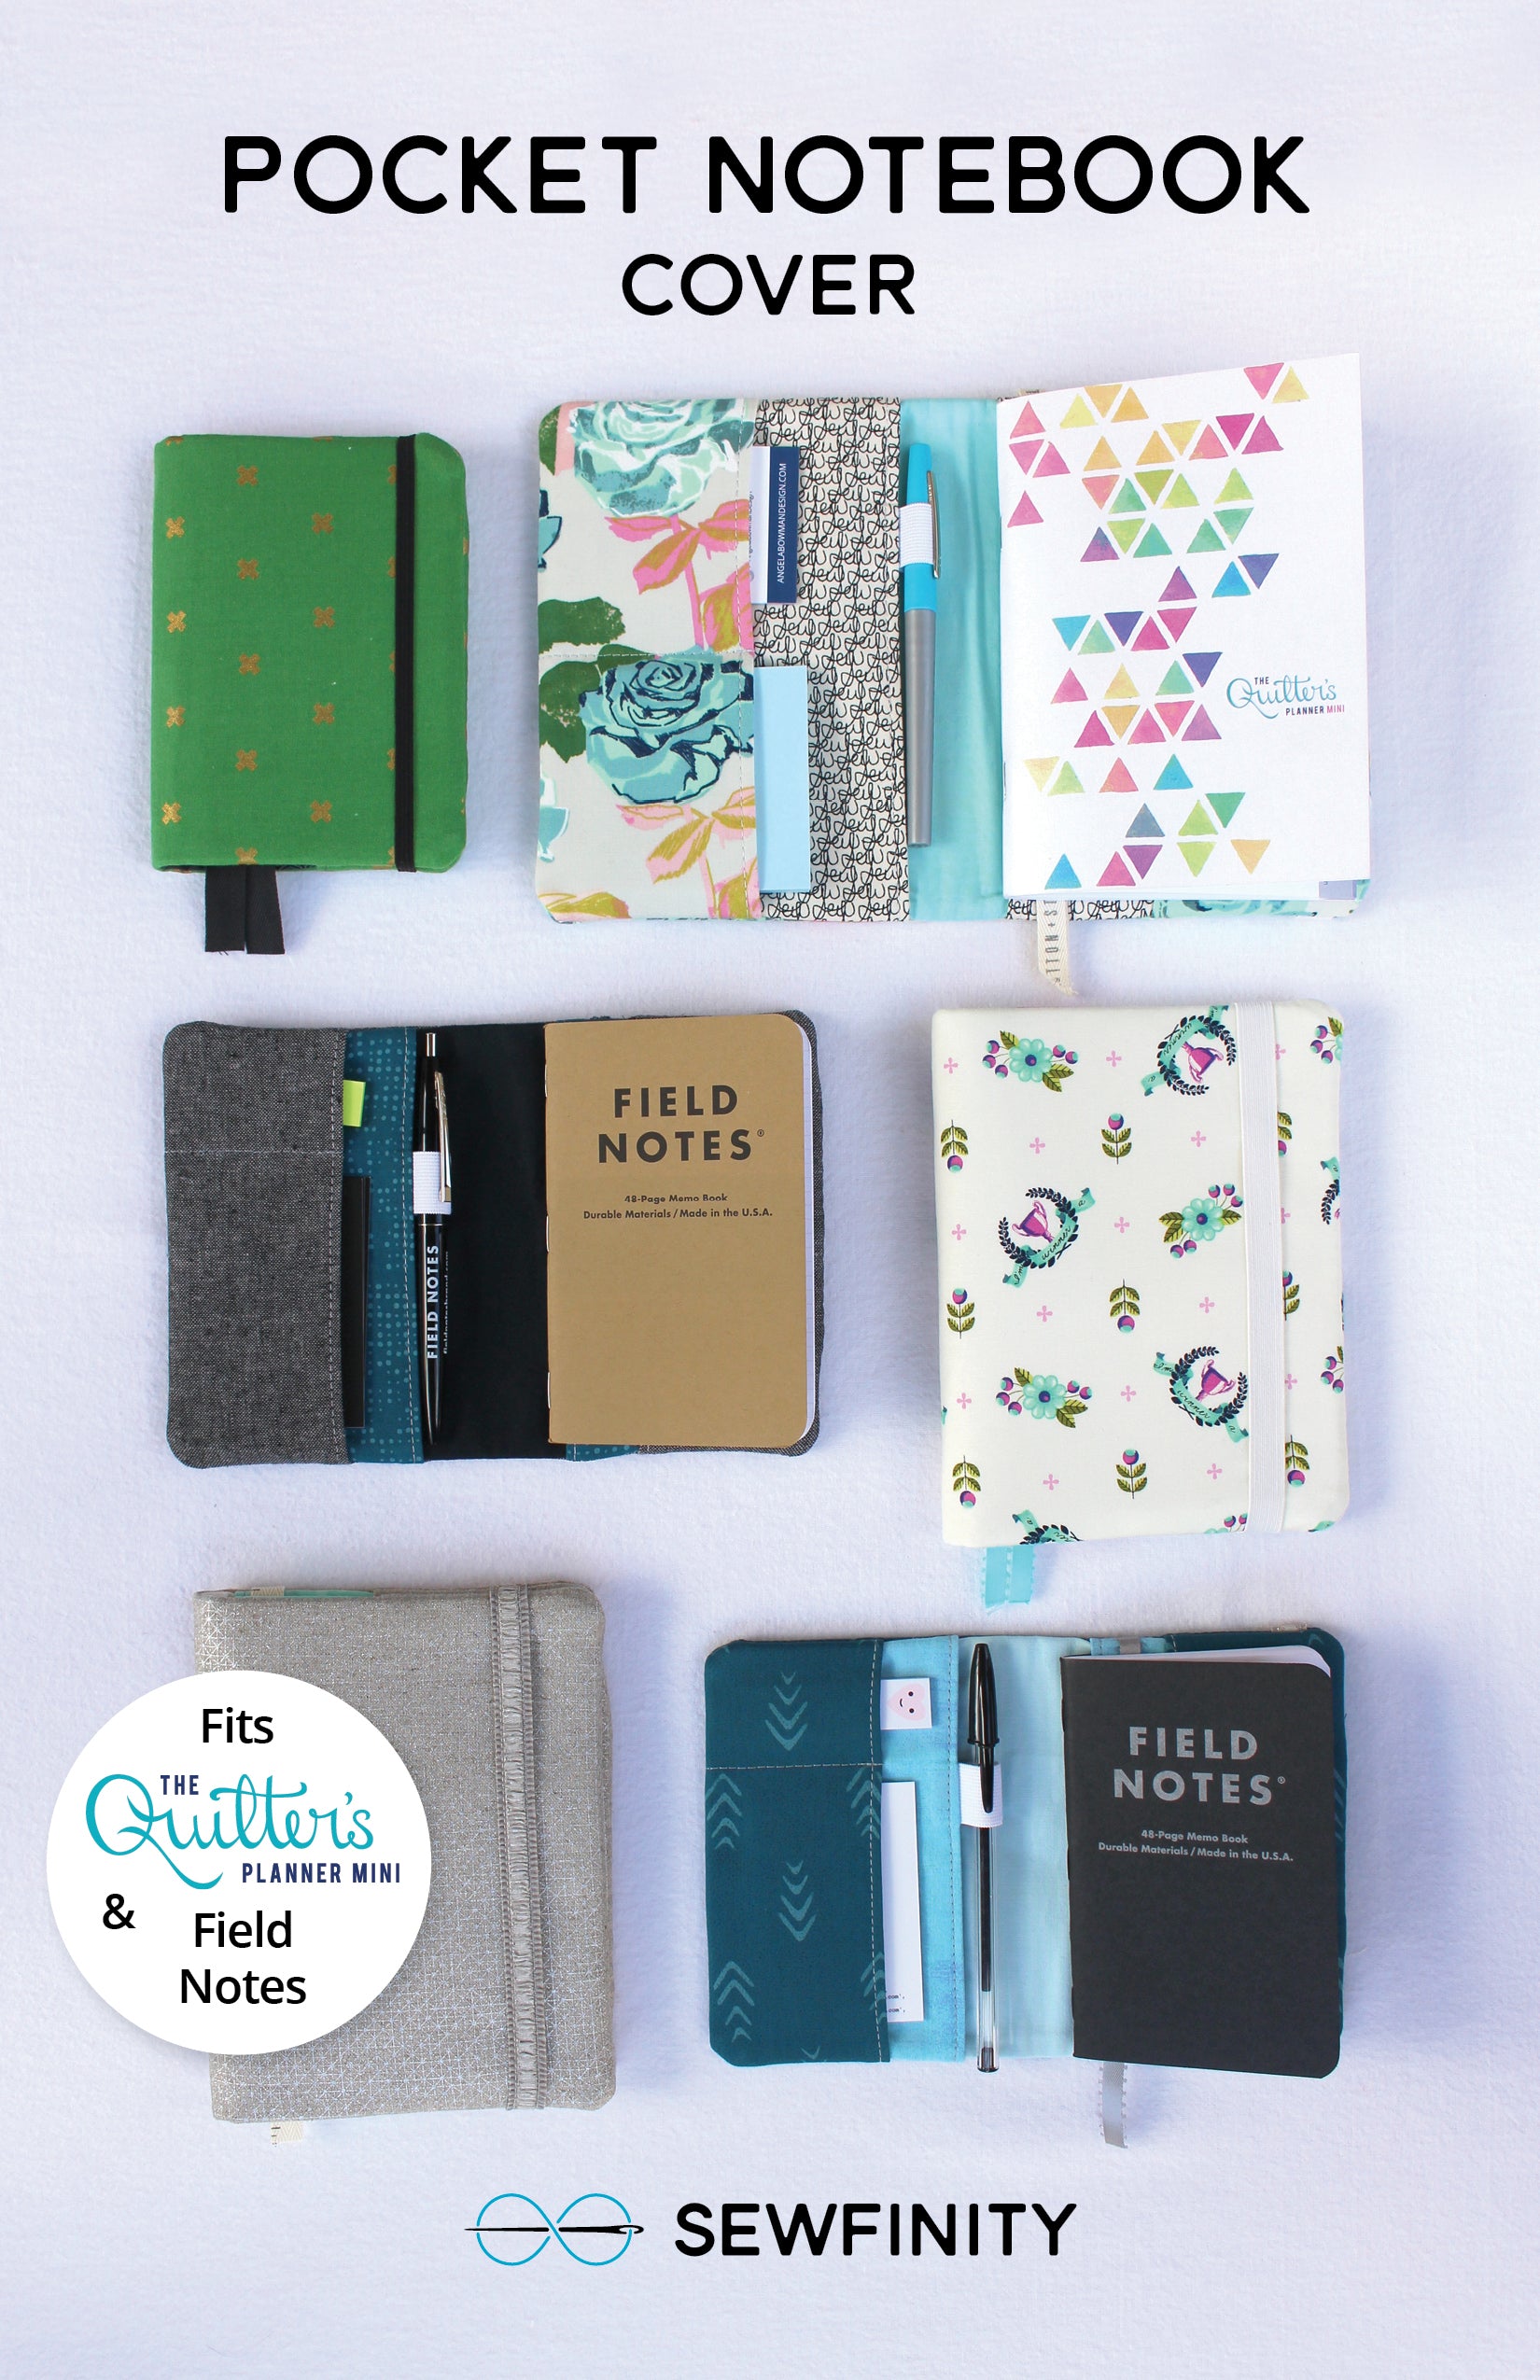 Pocket Notebook Cover Sewing Pattern by Sewfinity